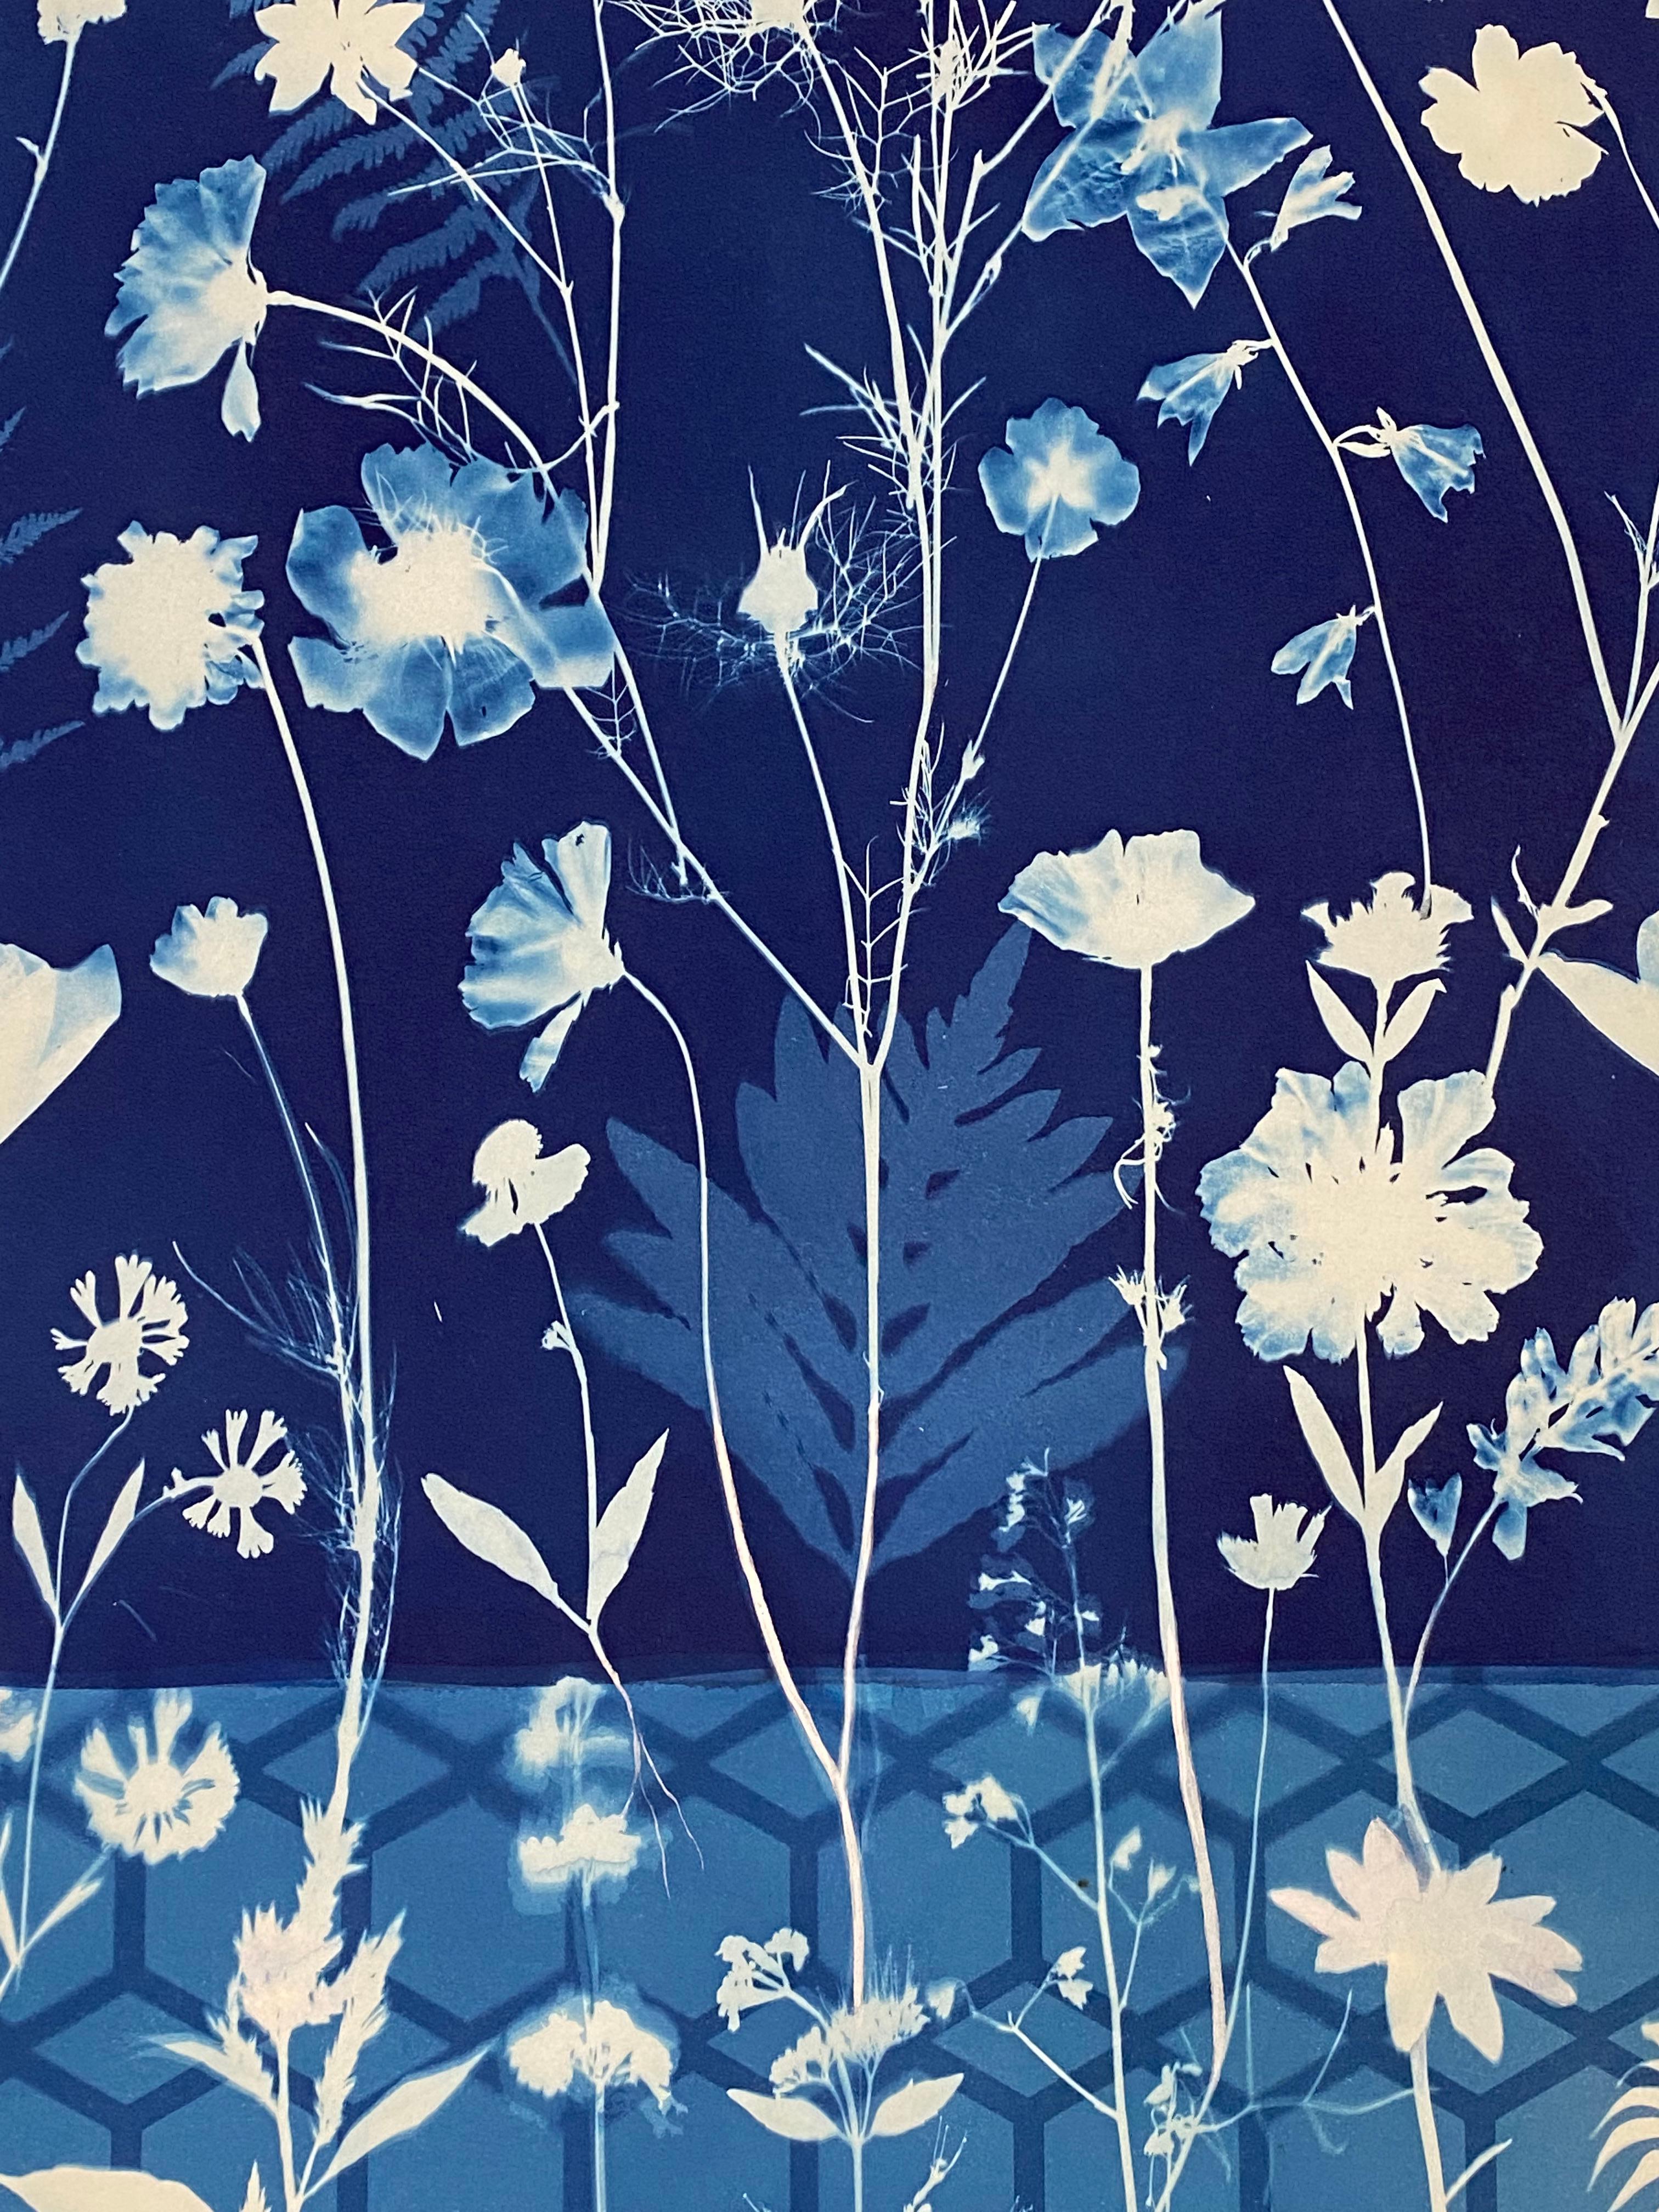 Cyanotype Painting Crocus, Star Flower, Cosmos, Ferns, Botanical Painting, Blue For Sale 1